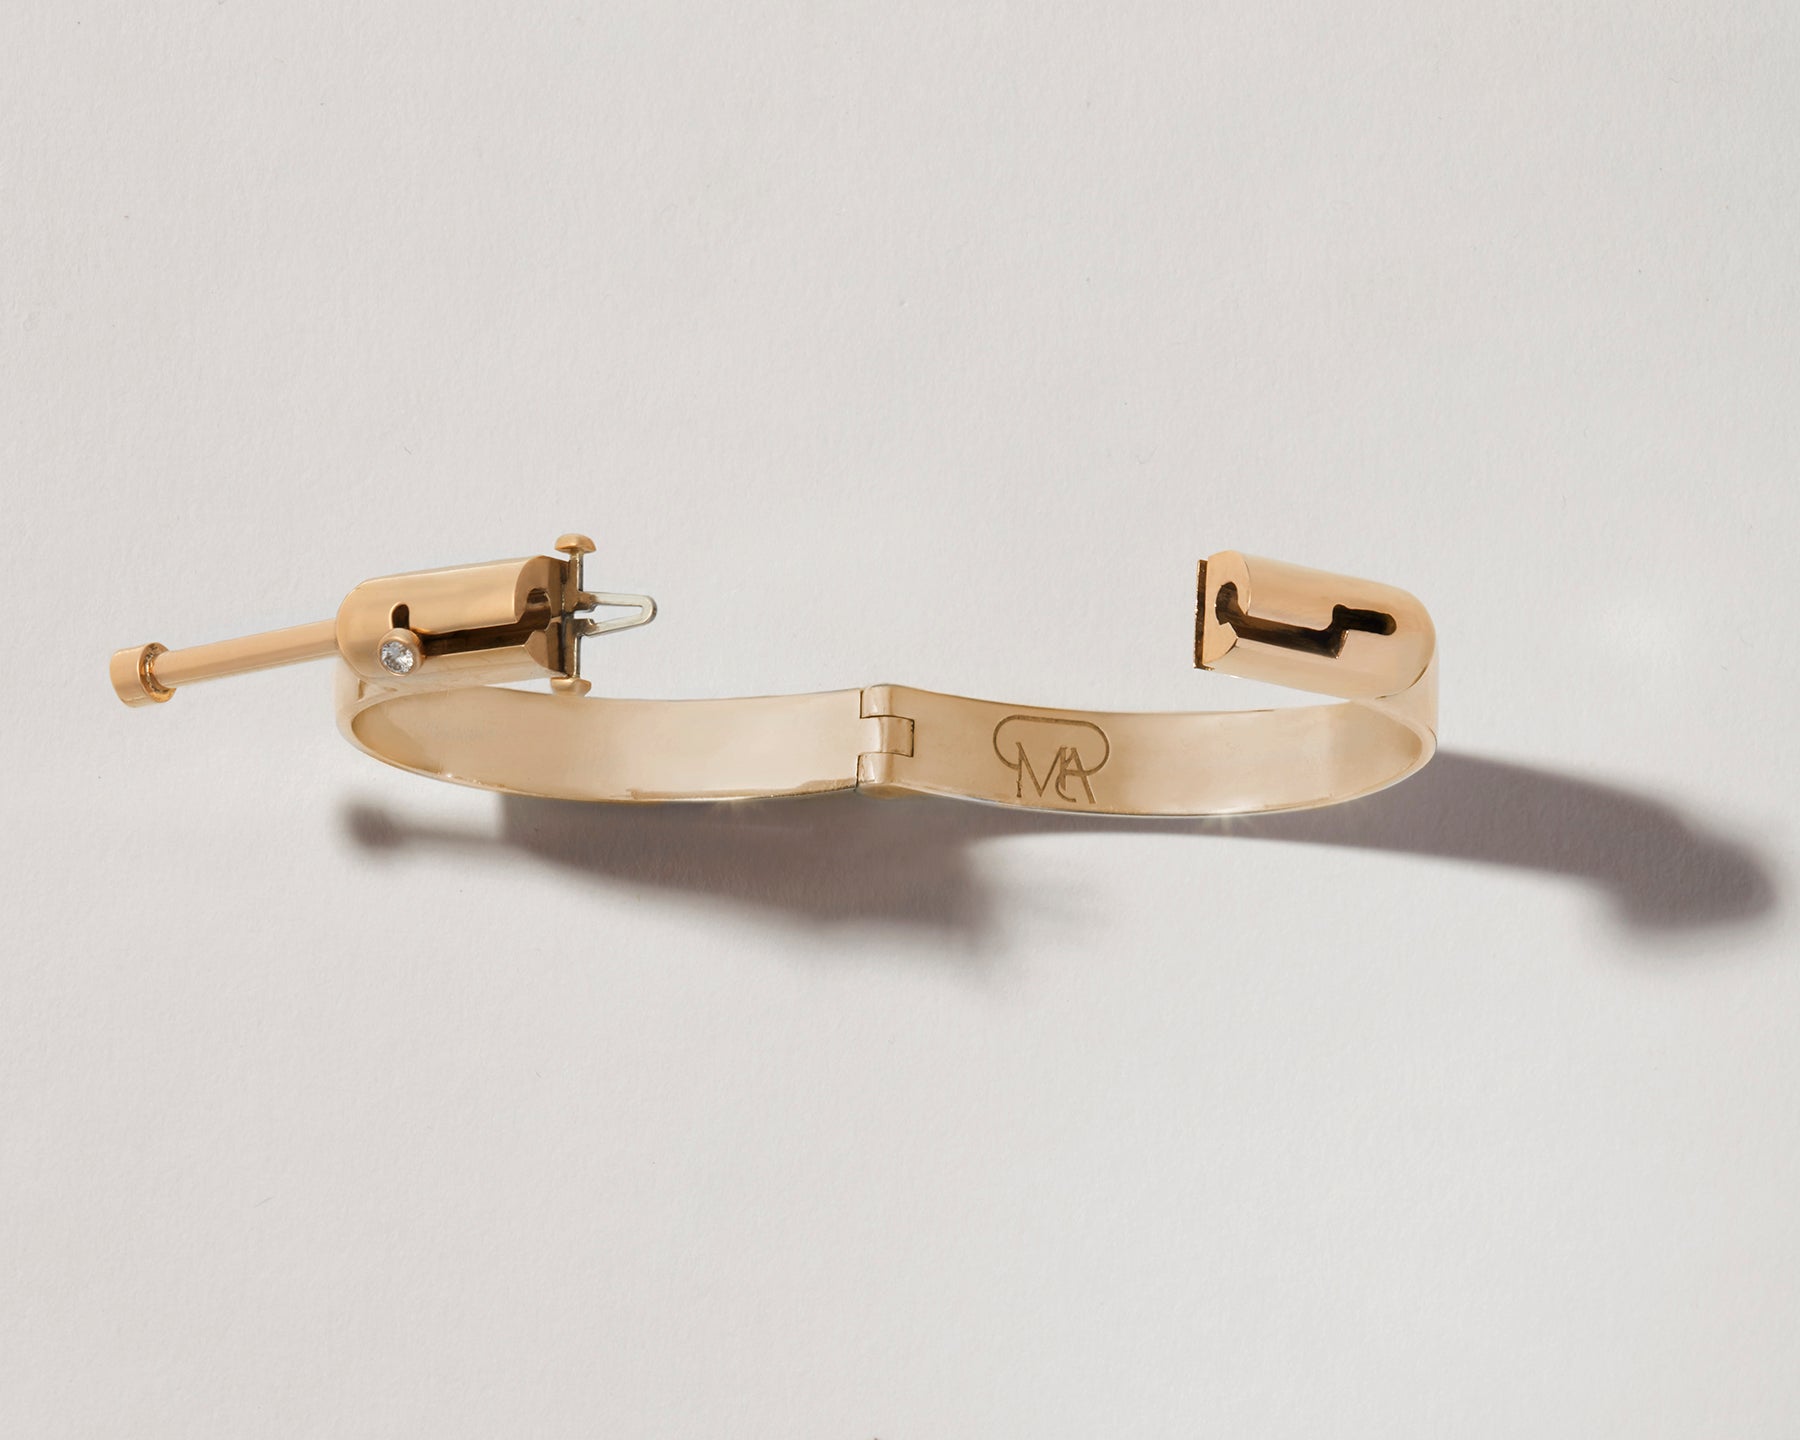 Overhead shot of Zephyr gold clasp bracelet with clasp open against white backdrop